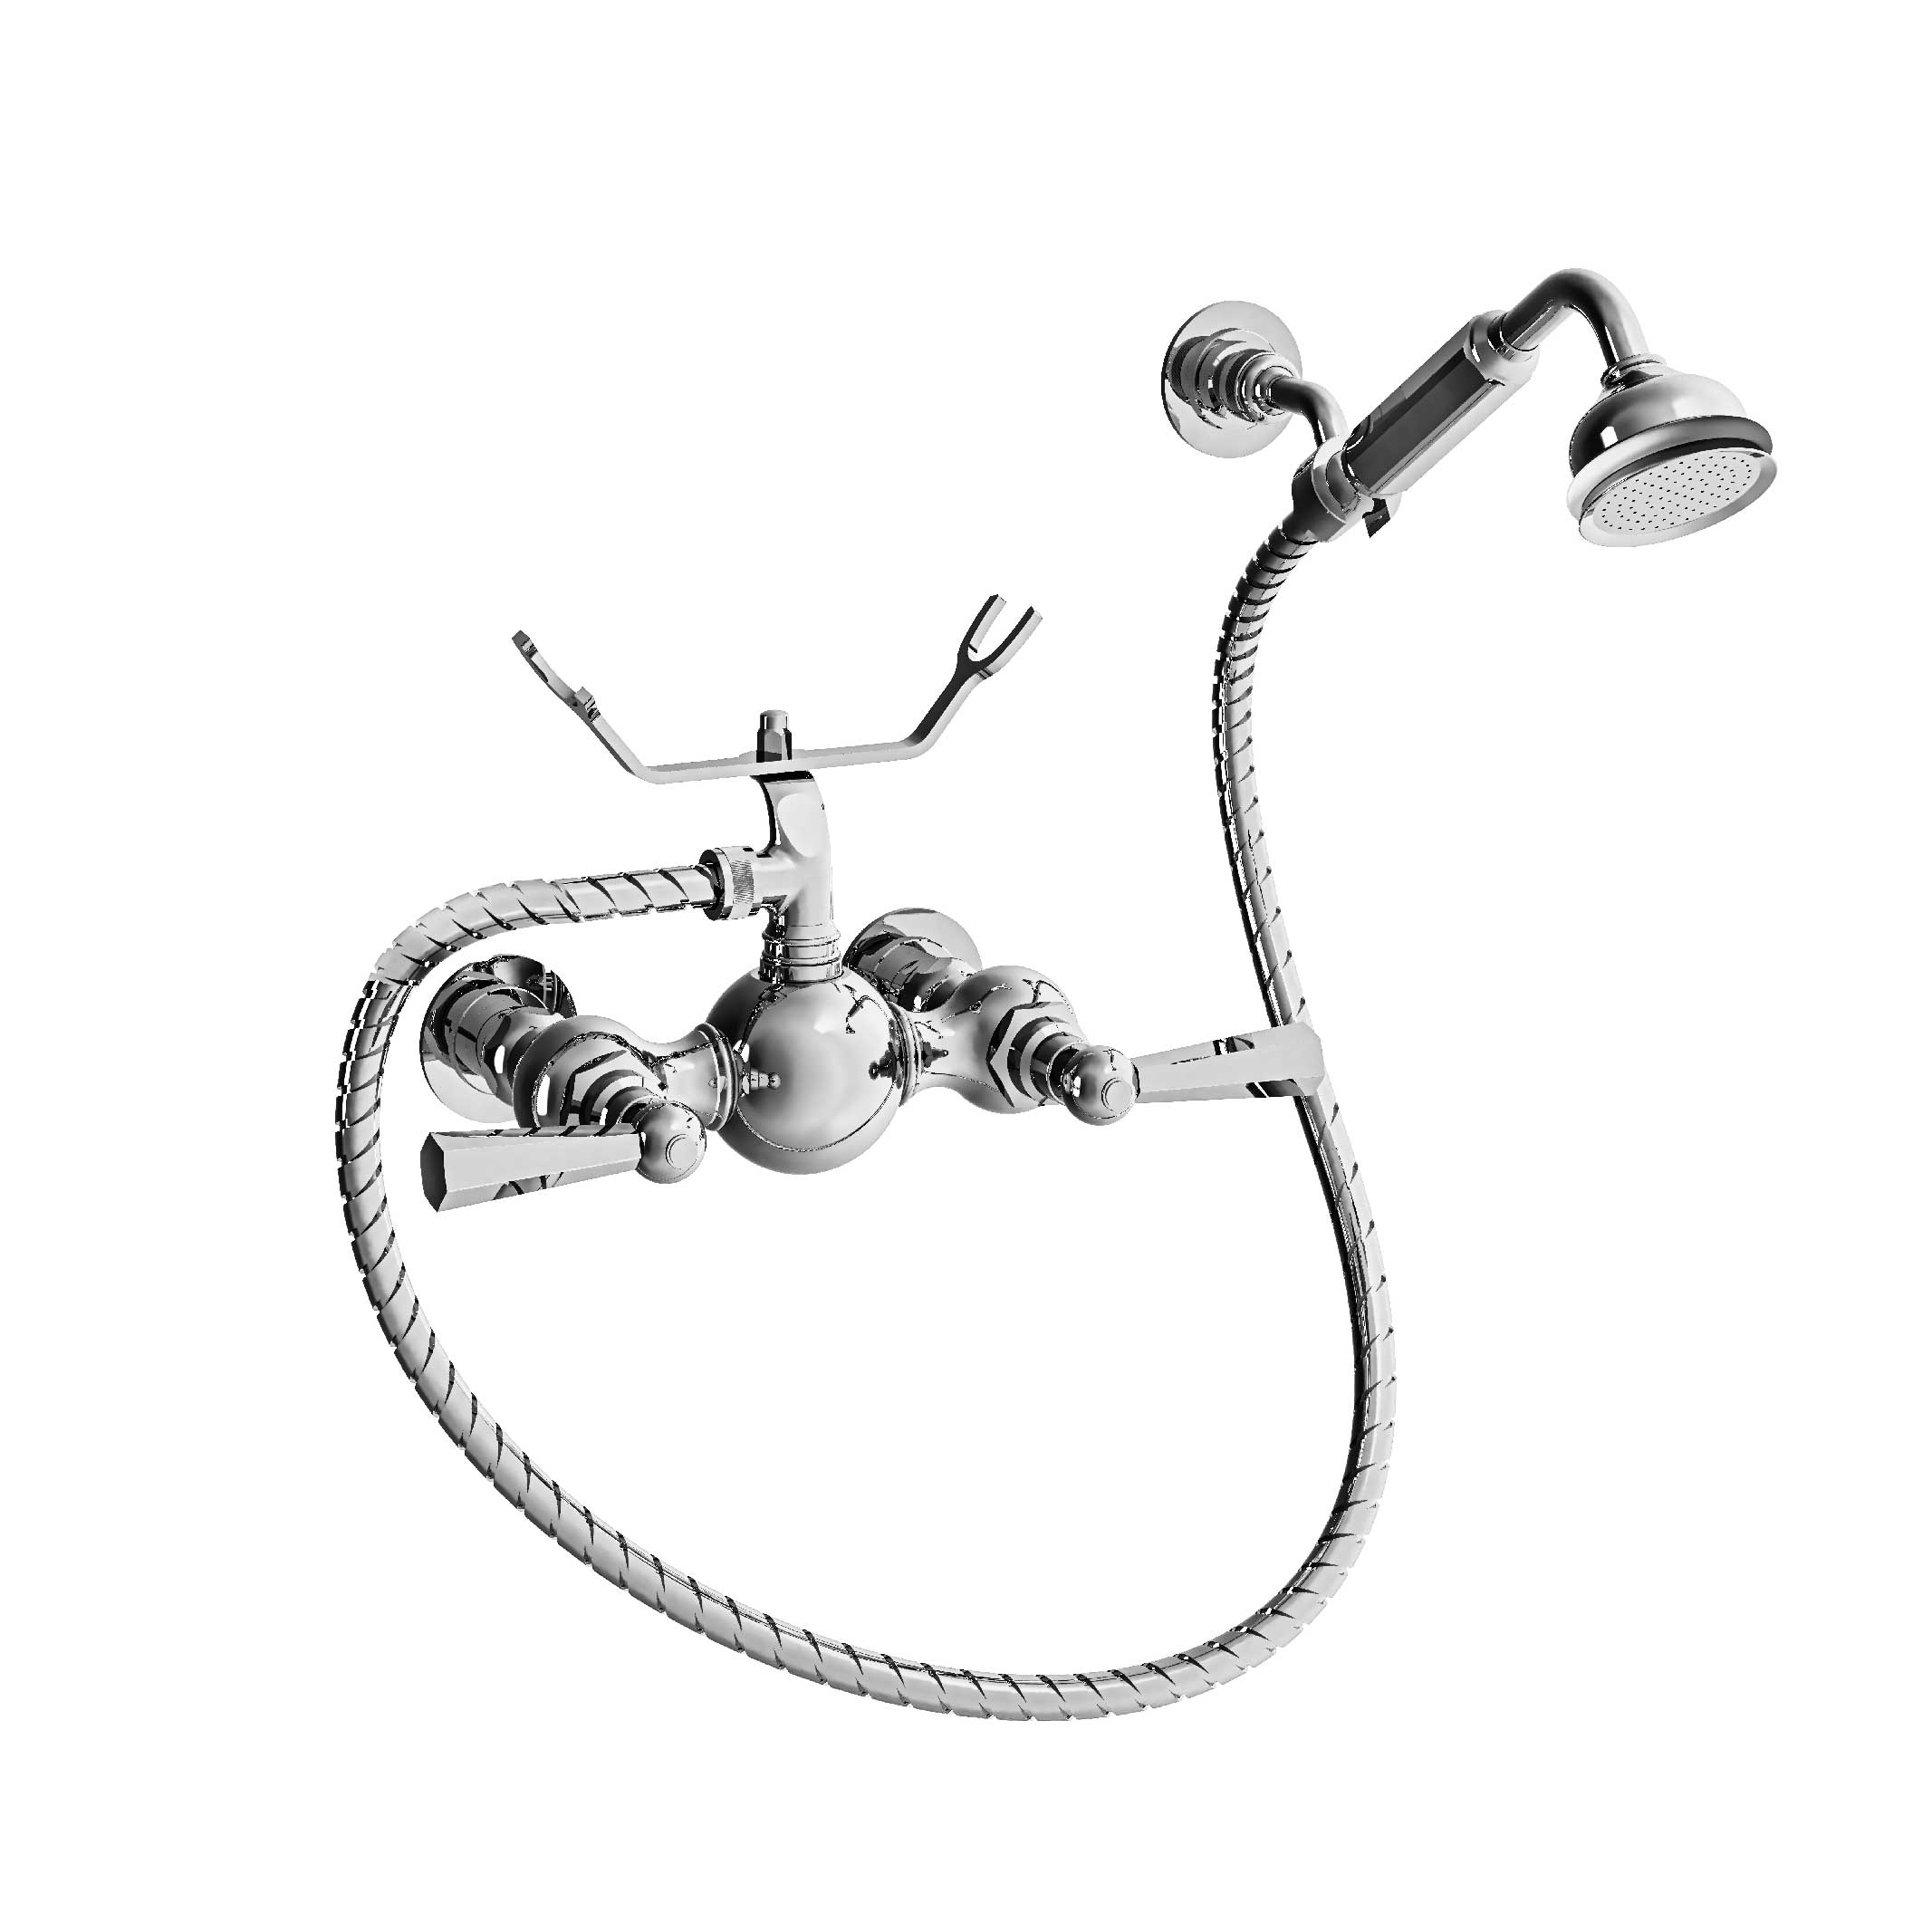 M39-2201 Shower mixer with hook